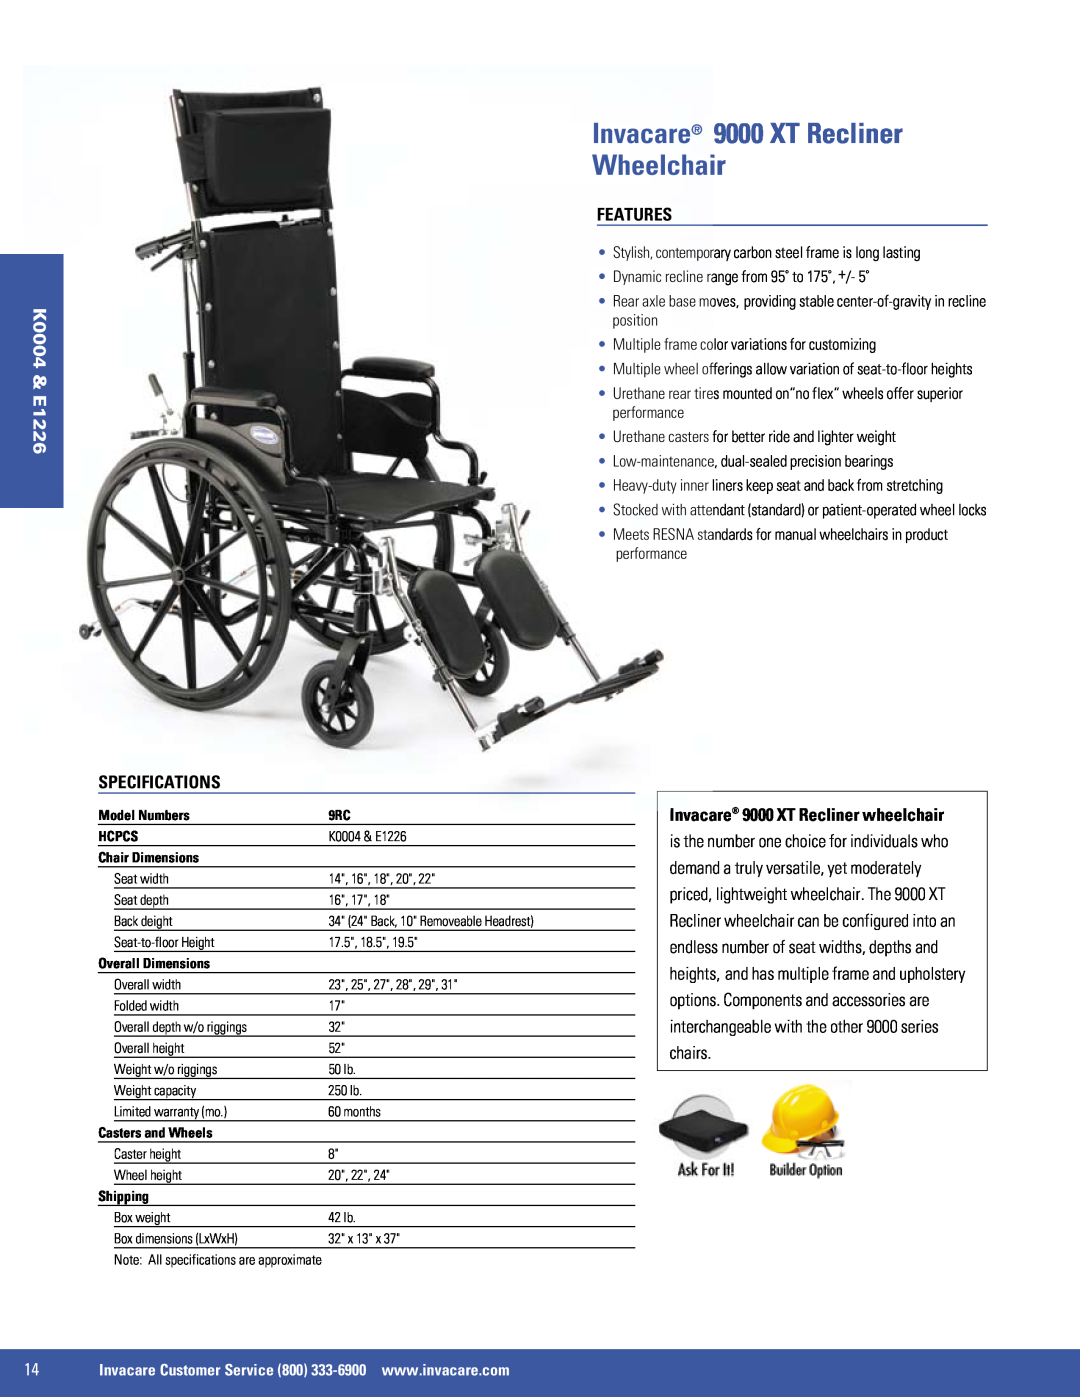 Invacare SX5, 9000 SL, EX2 manual Invacare 9000 XT Recliner Wheelchair, K0004 & E1226, Features, Specifications 